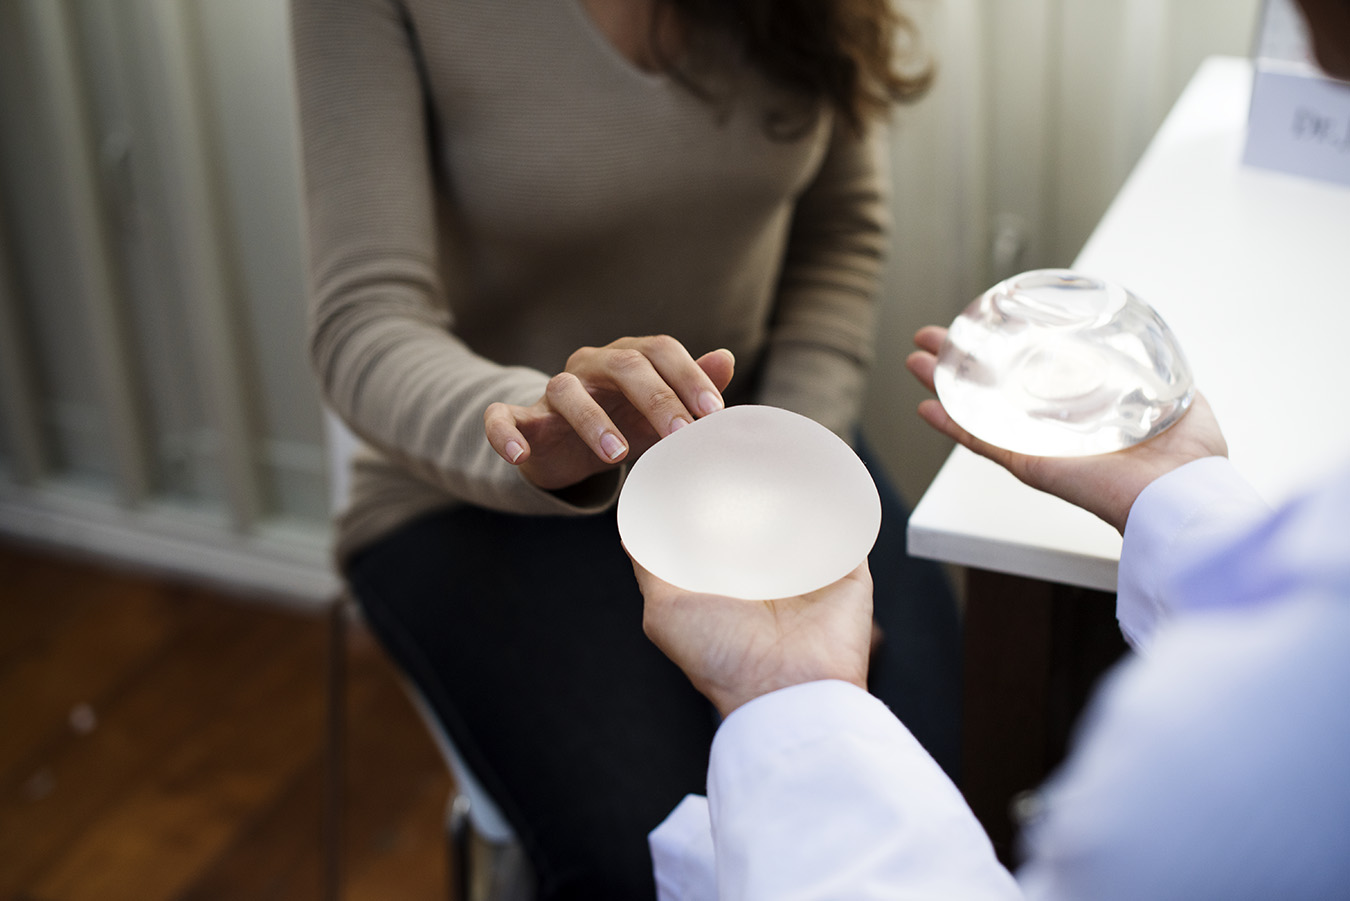 Woman looks at breast implant model at doctor's office